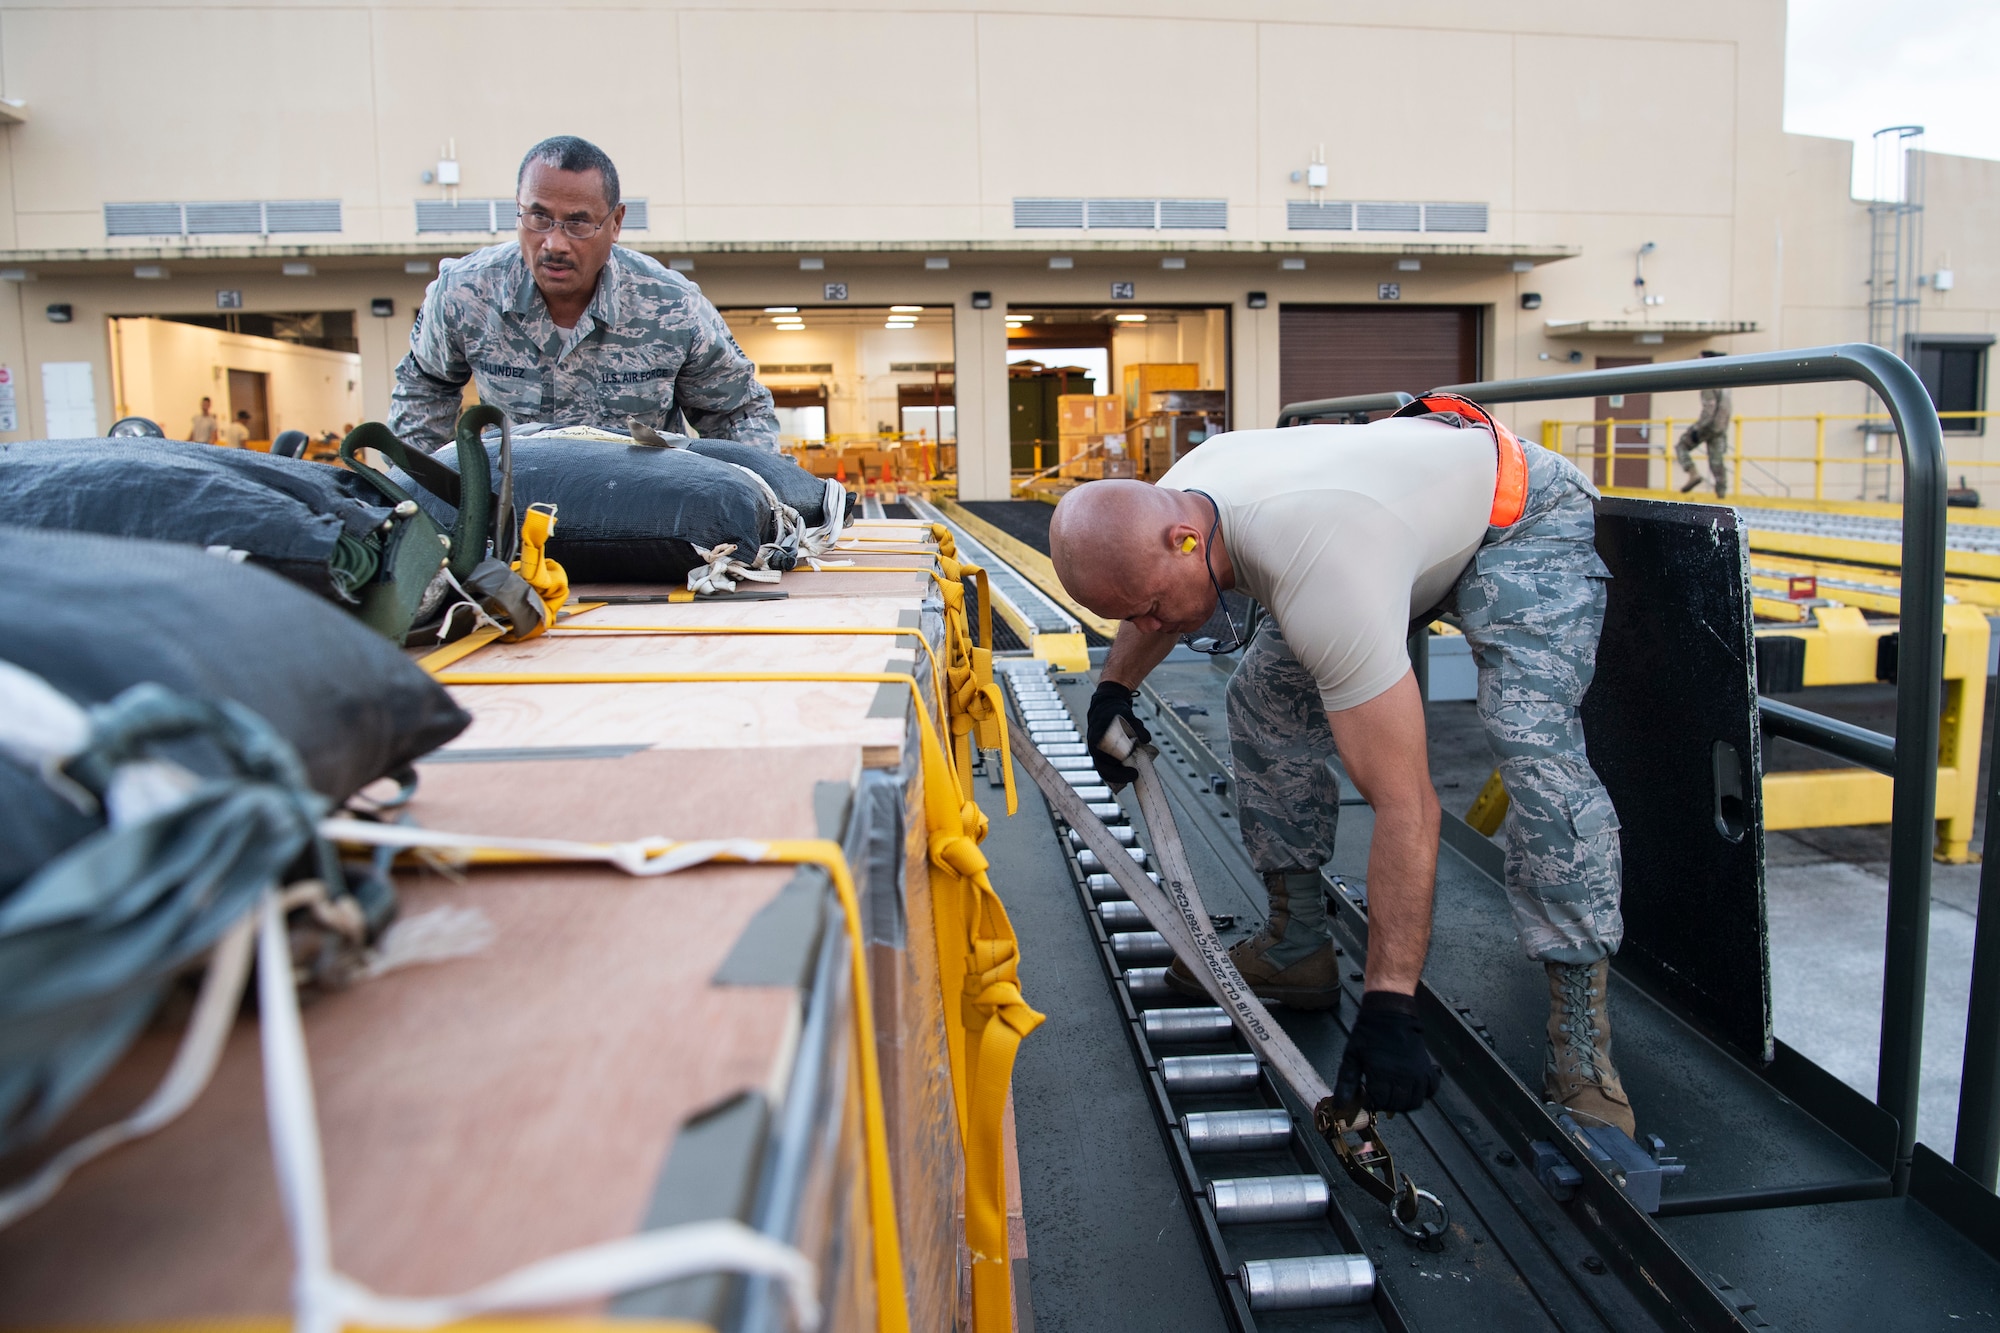 U.S. Air Force Tech. Sgt. Sinforoso Galindez (left to right) and Master Sgt. Angel Llagas, both air transportation specialist with the U.S. Air Force Reserve’s 44th Aerial Port Squadron, secure airdrop bundles onto a Tunner 60K aircraft loader for transportation out to awaiting aircraft Dec 9, 2018, during Operation Christmas Drop at Andersen Air Force Base, Guam. Operation Christmas Drop is a U.S. Air Force-led trilateral training event that includes air support from the Japanese Air Self Defense Force and Royal Australian Air Force to airdrop supplies to the Commonwealth of the Northern Marianas, Federated States of Micronesia, and the Republic of Palau. (U.S. Air Force photo by Jerry R. Bynum)